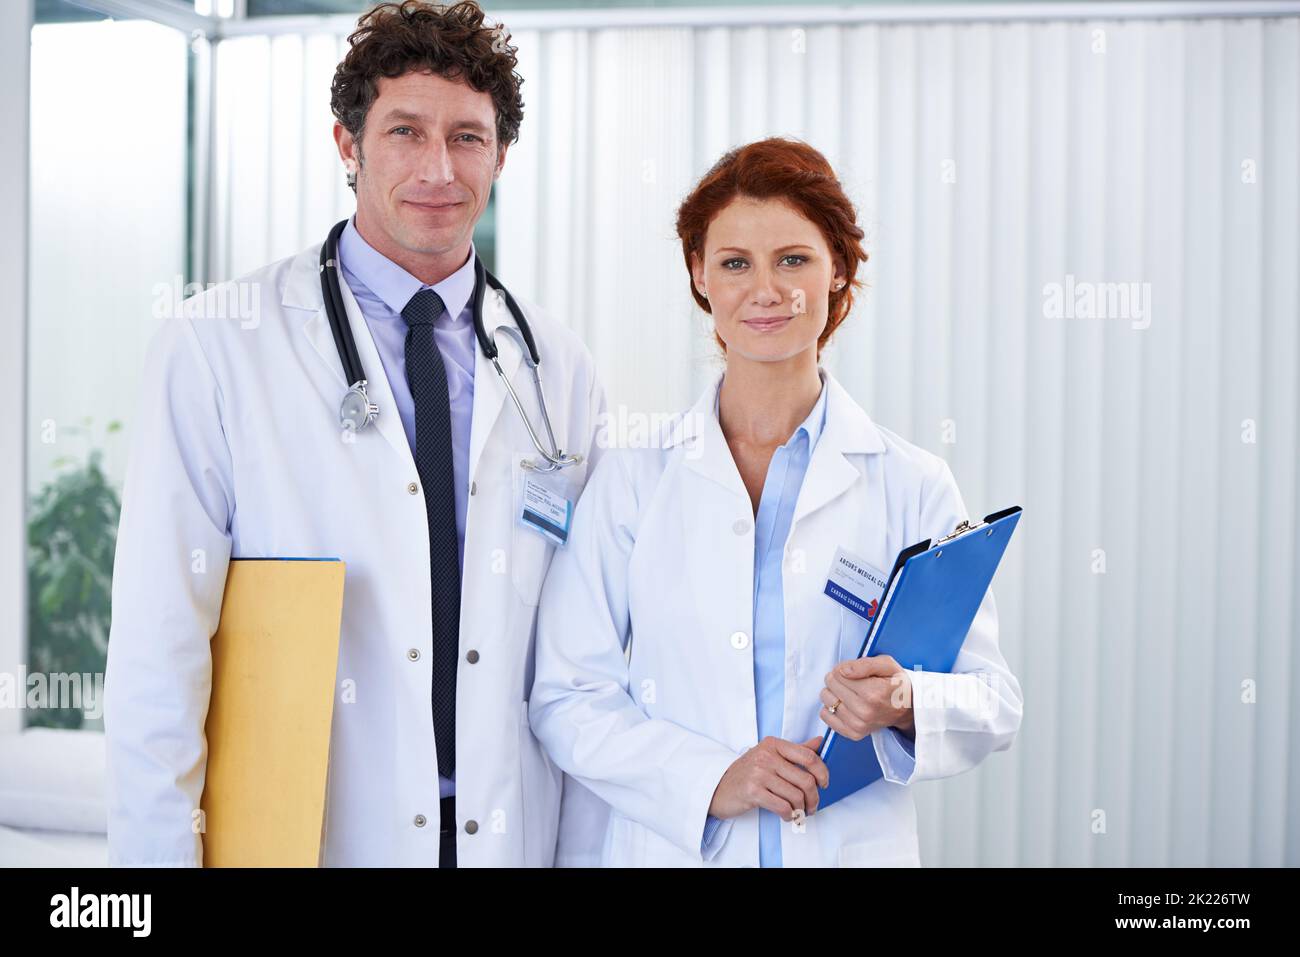 A trustworthy team. two doctors looking happily at the camera. Stock Photo